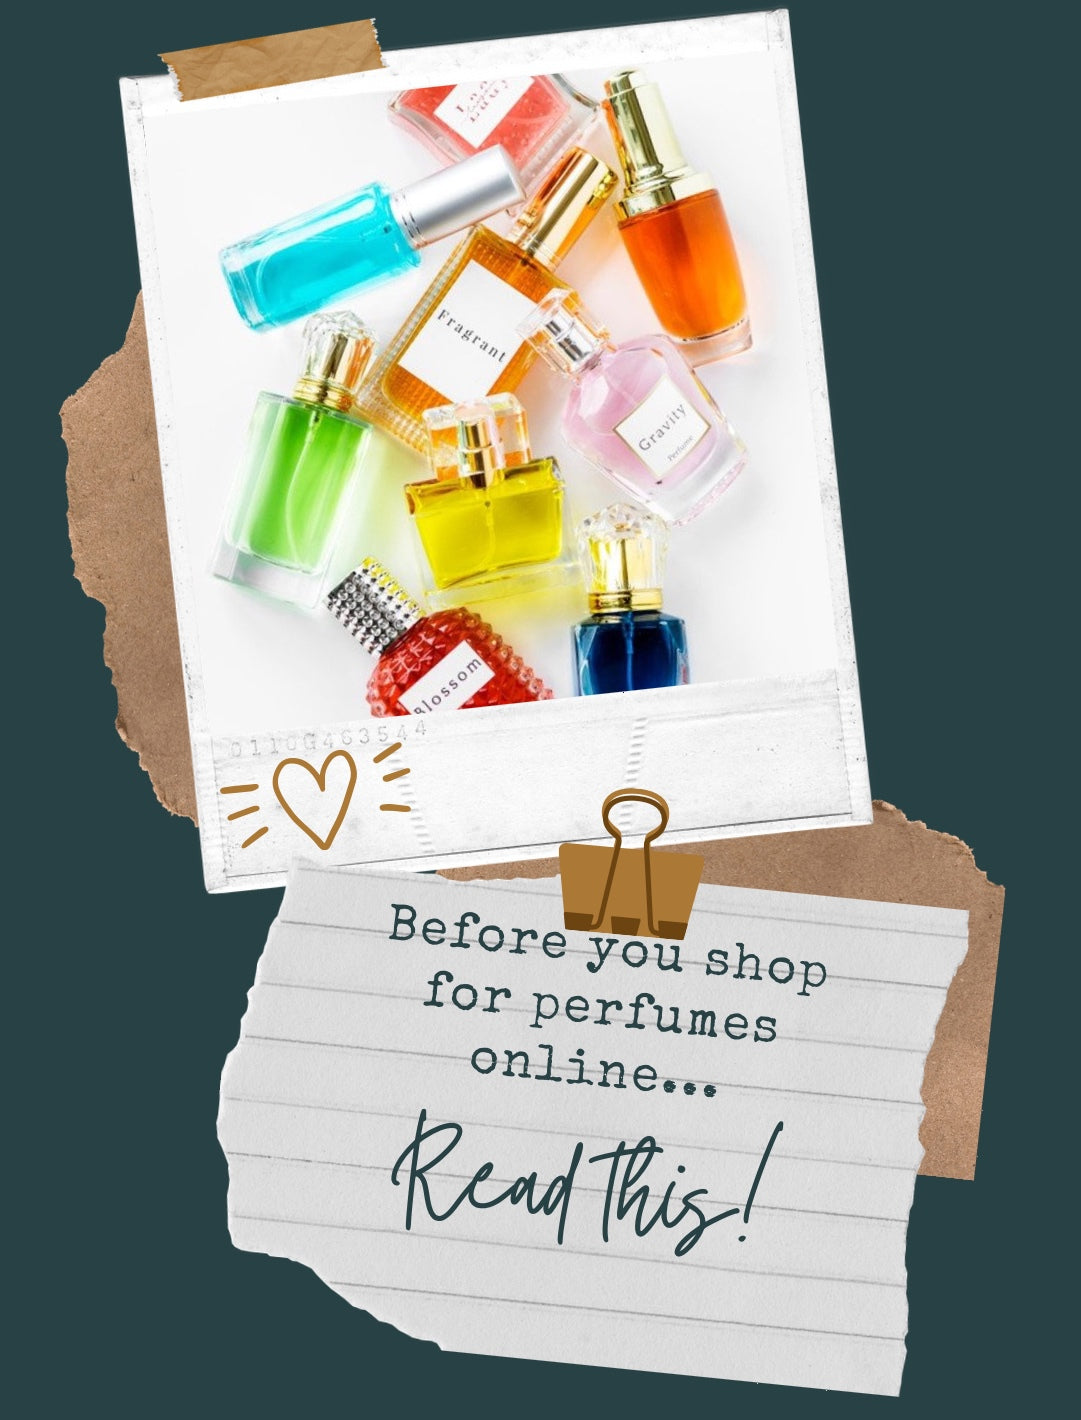 BEFORE YOU SHOP FOR FRAGRANCES ONLINE, READ THIS!